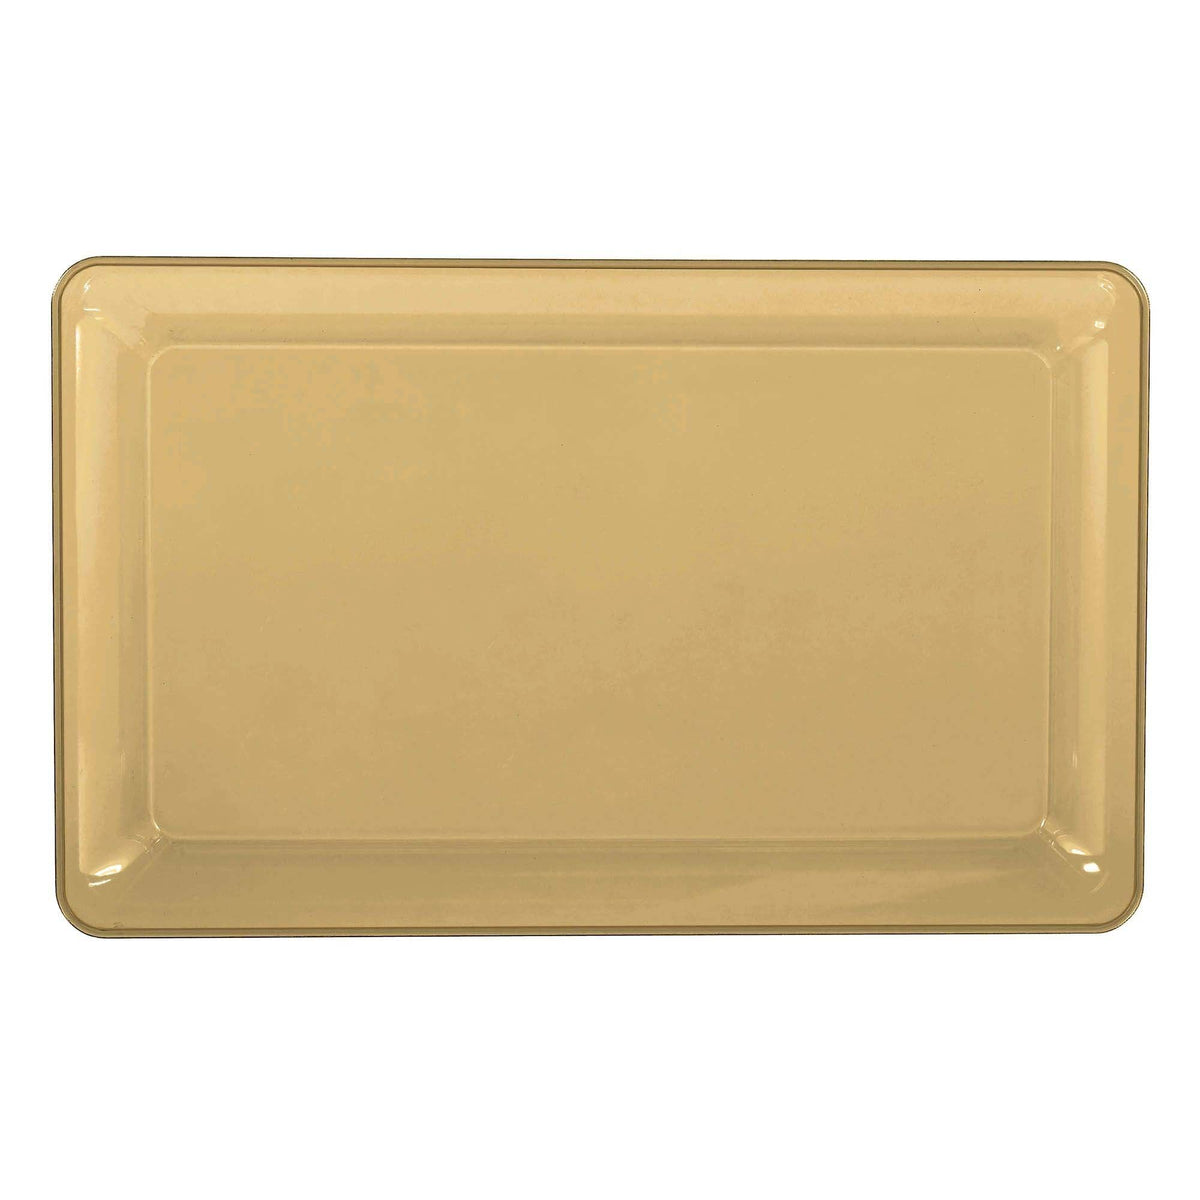 AMSCAN CA Disposable-Plasticware Gold Recyclable Plastic Tray, 11 x 18 Inches, 1 Count